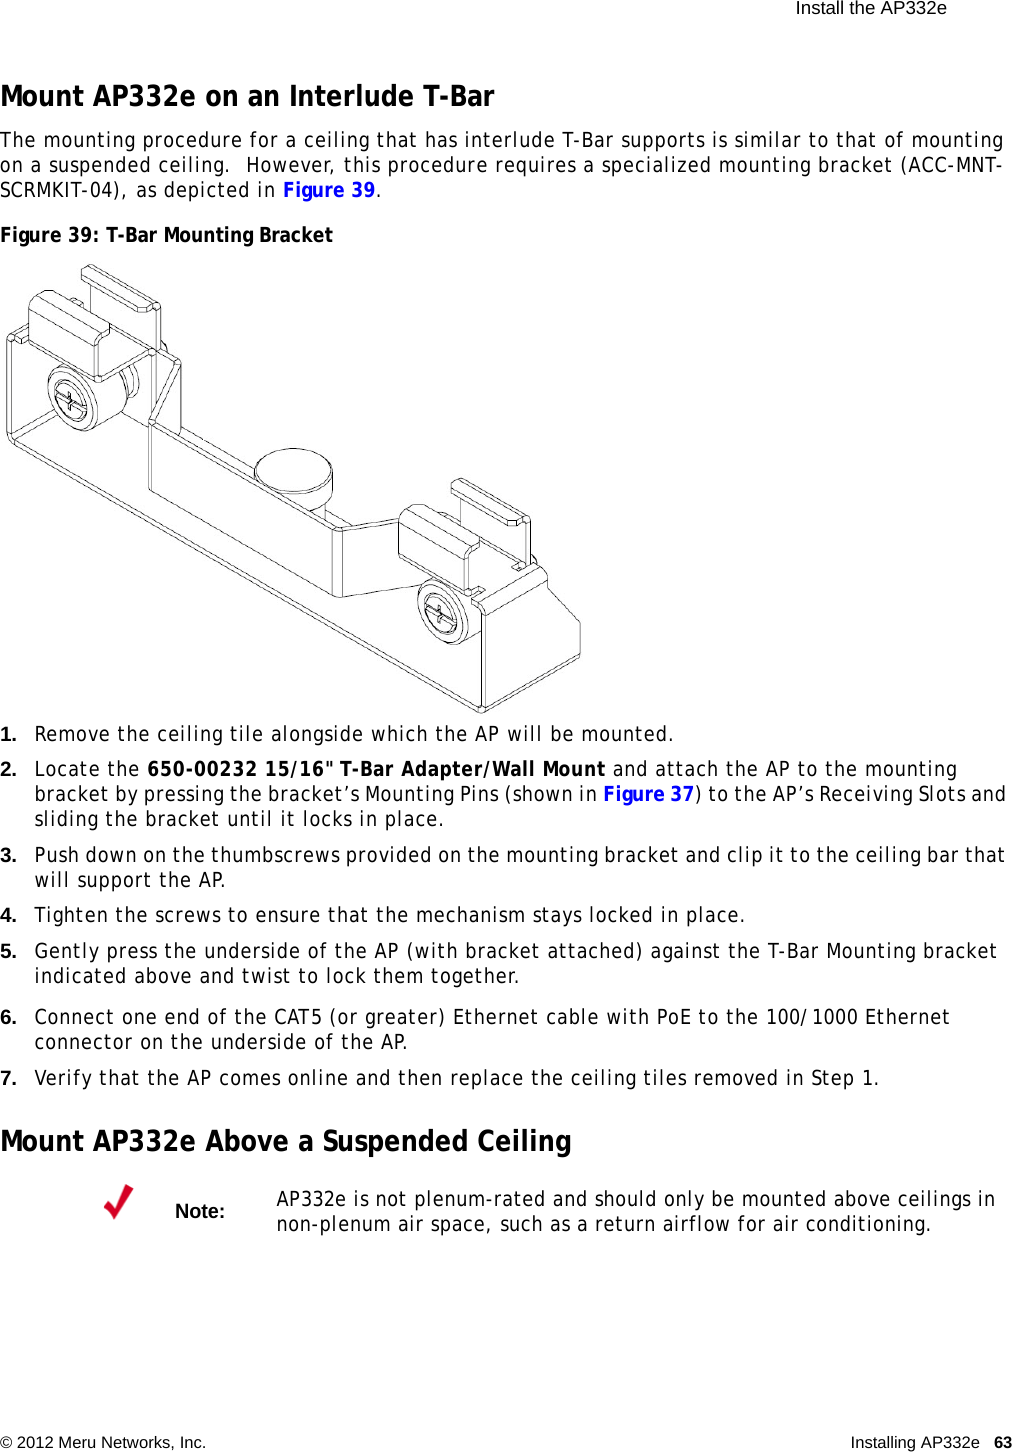  Install the AP332e © 2012 Meru Networks, Inc. Installing AP332e 63 Mount AP332e on an Interlude T-BarThe mounting procedure for a ceiling that has interlude T-Bar supports is similar to that of mounting on a suspended ceiling.  However, this procedure requires a specialized mounting bracket (ACC-MNT-SCRMKIT-04), as depicted in Figure 39.Figure 39: T-Bar Mounting Bracket1. Remove the ceiling tile alongside which the AP will be mounted.2. Locate the 650-00232 15/16&quot; T-Bar Adapter/Wall Mount and attach the AP to the mounting bracket by pressing the bracket’s Mounting Pins (shown in Figure 37) to the AP’s Receiving Slots and sliding the bracket until it locks in place.3. Push down on the thumbscrews provided on the mounting bracket and clip it to the ceiling bar that will support the AP.4. Tighten the screws to ensure that the mechanism stays locked in place.5. Gently press the underside of the AP (with bracket attached) against the T-Bar Mounting bracket indicated above and twist to lock them together.6. Connect one end of the CAT5 (or greater) Ethernet cable with PoE to the 100/1000 Ethernet connector on the underside of the AP.7. Verify that the AP comes online and then replace the ceiling tiles removed in Step 1.Mount AP332e Above a Suspended CeilingNote:AP332e is not plenum-rated and should only be mounted above ceilings in non-plenum air space, such as a return airflow for air conditioning.